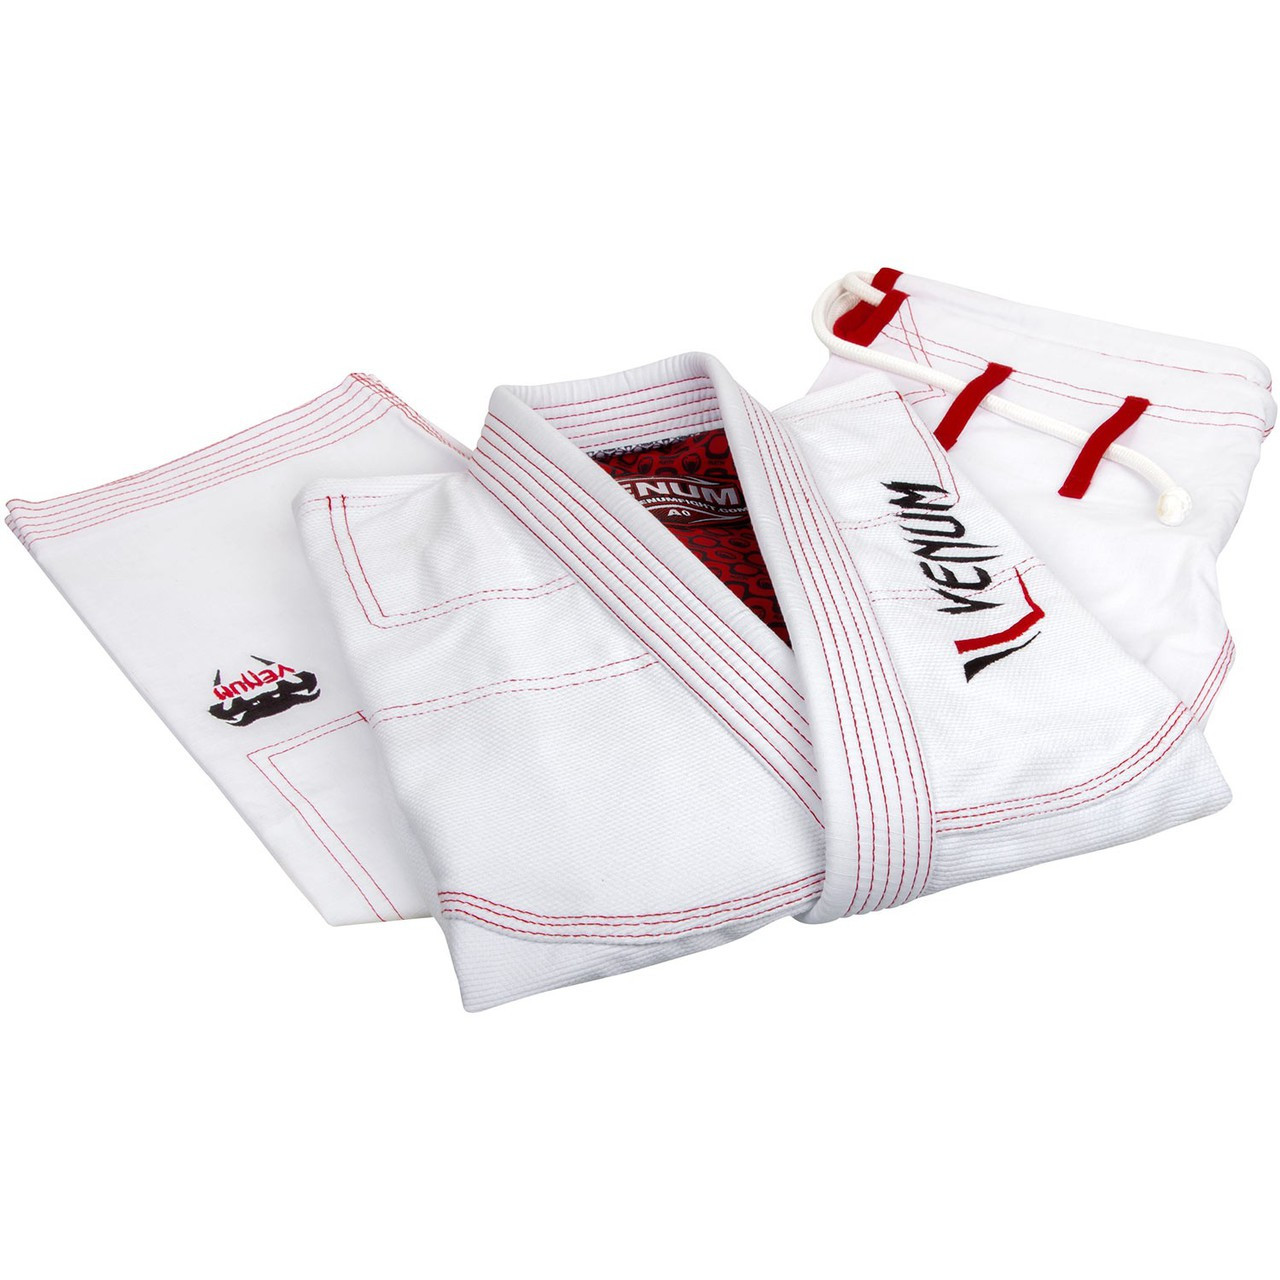 Folded white and red gi Venum Elite Light BJJ GI in White is now available at www.thejiujitsushop.com

Enjoy Free Shipping from The Jiu Jitsu Shop today! 